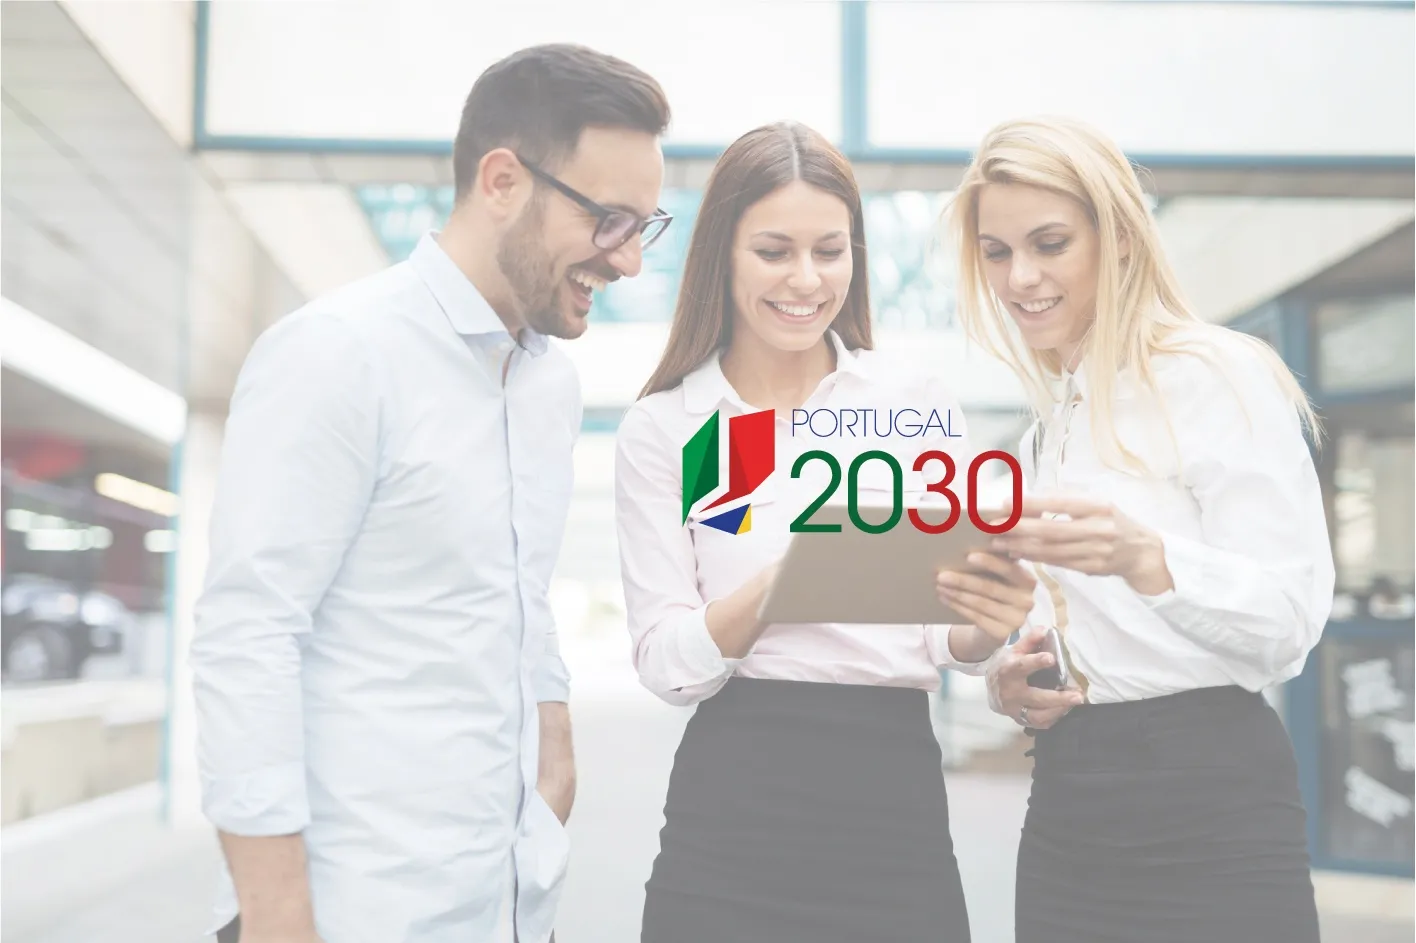 Want to know more about PT2030 opportunities?